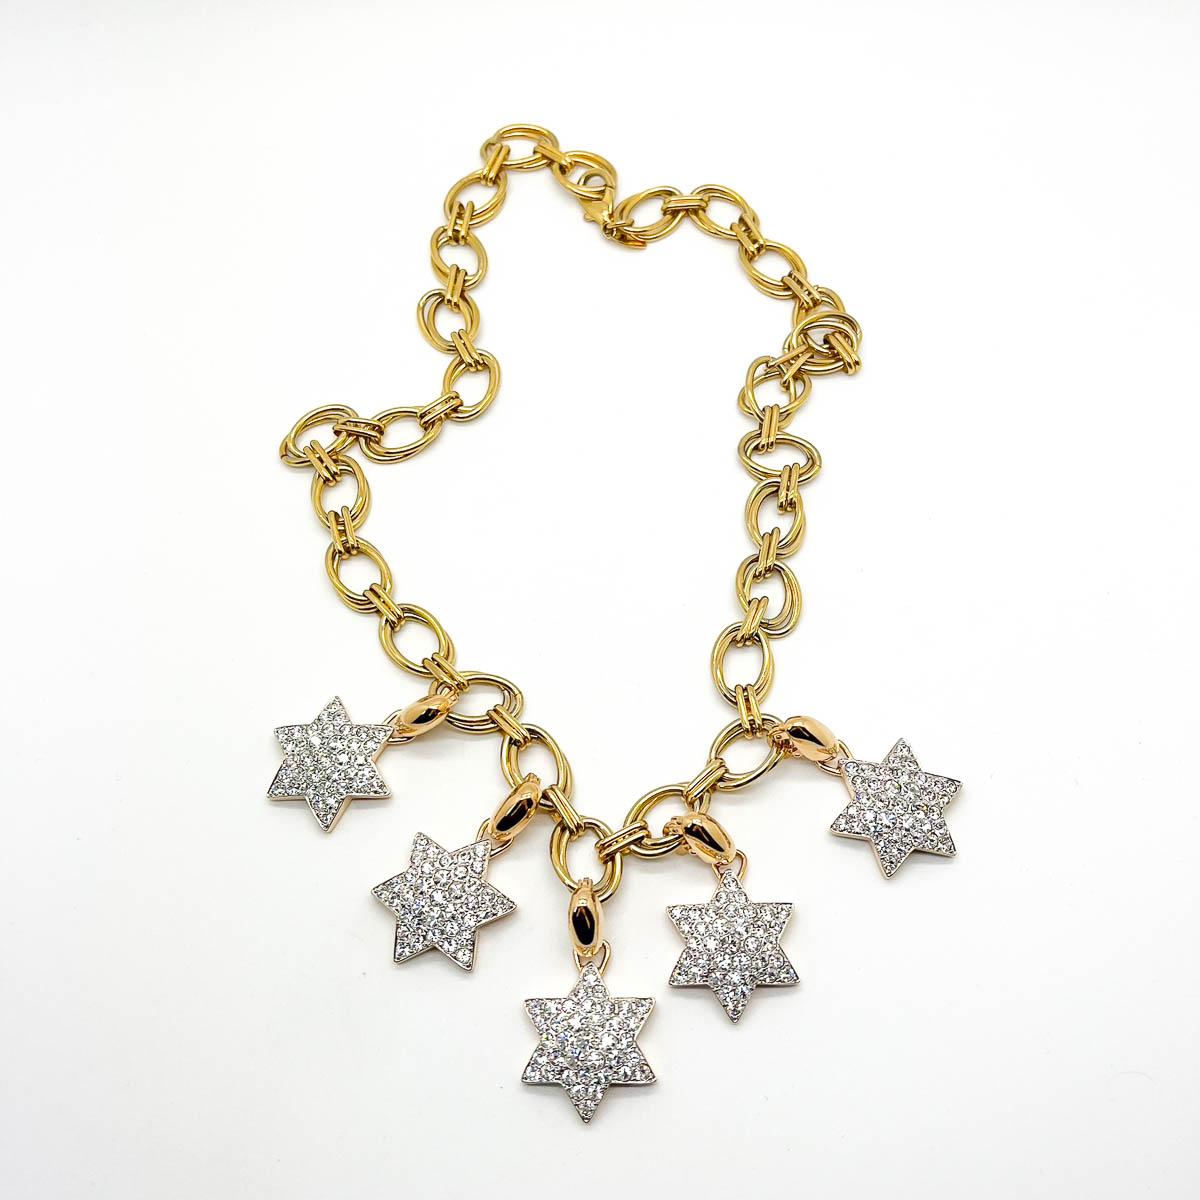 A spectacular statement vintage star charm necklace with removeable charms. A chunky chain adorned with five fabulous removeable, crystal set, star charms. Alter you look and wear as few or many stars as you like.
An unsigned beauty. A rare